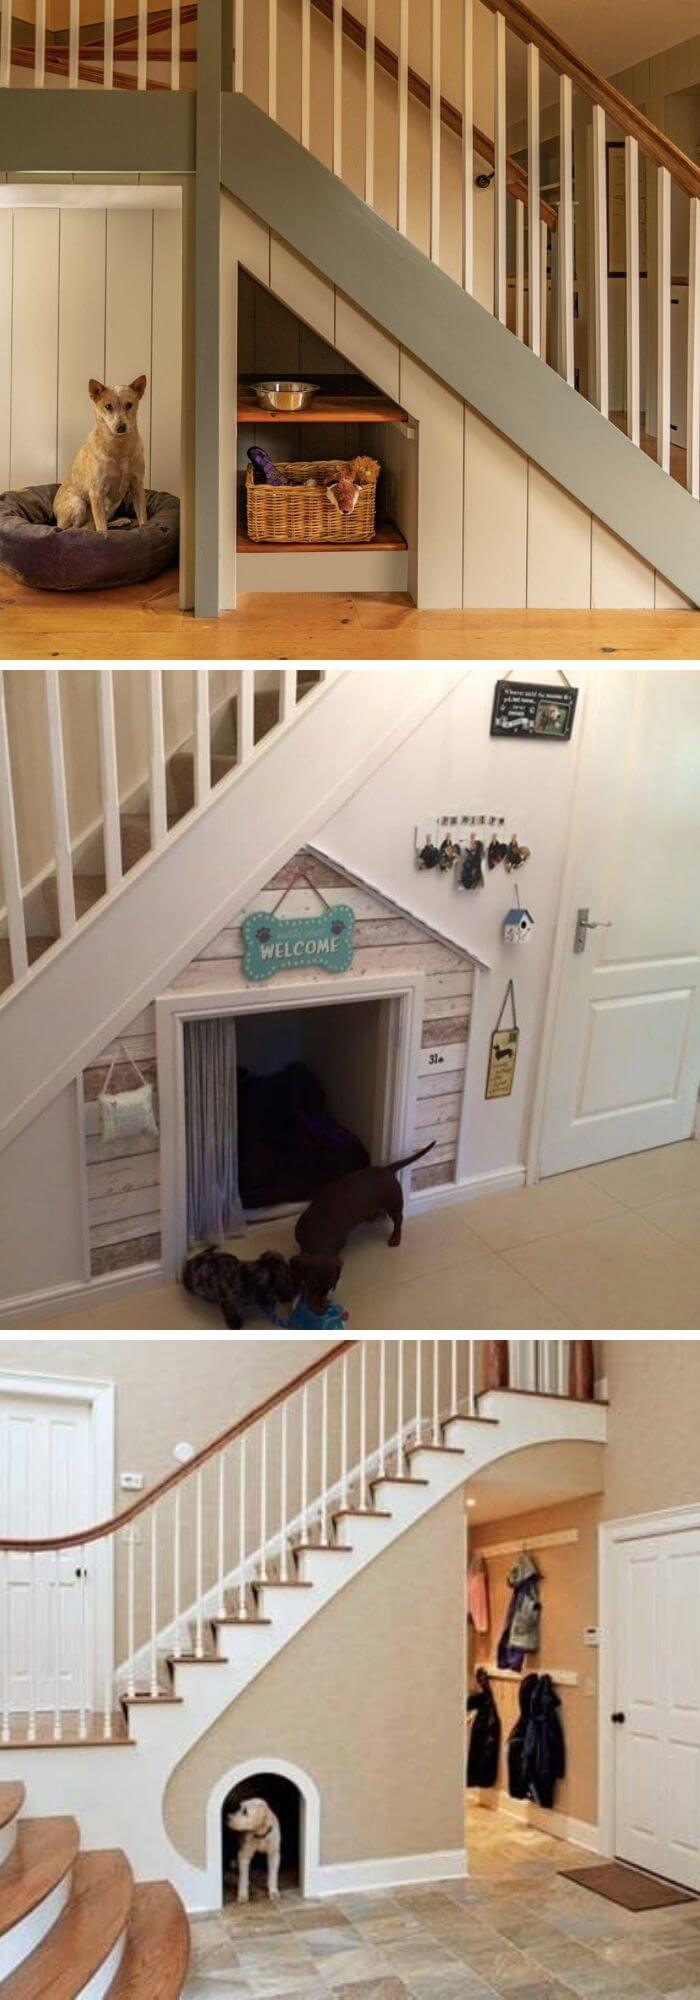 Heaven for dogs and other pets underneath the stairs